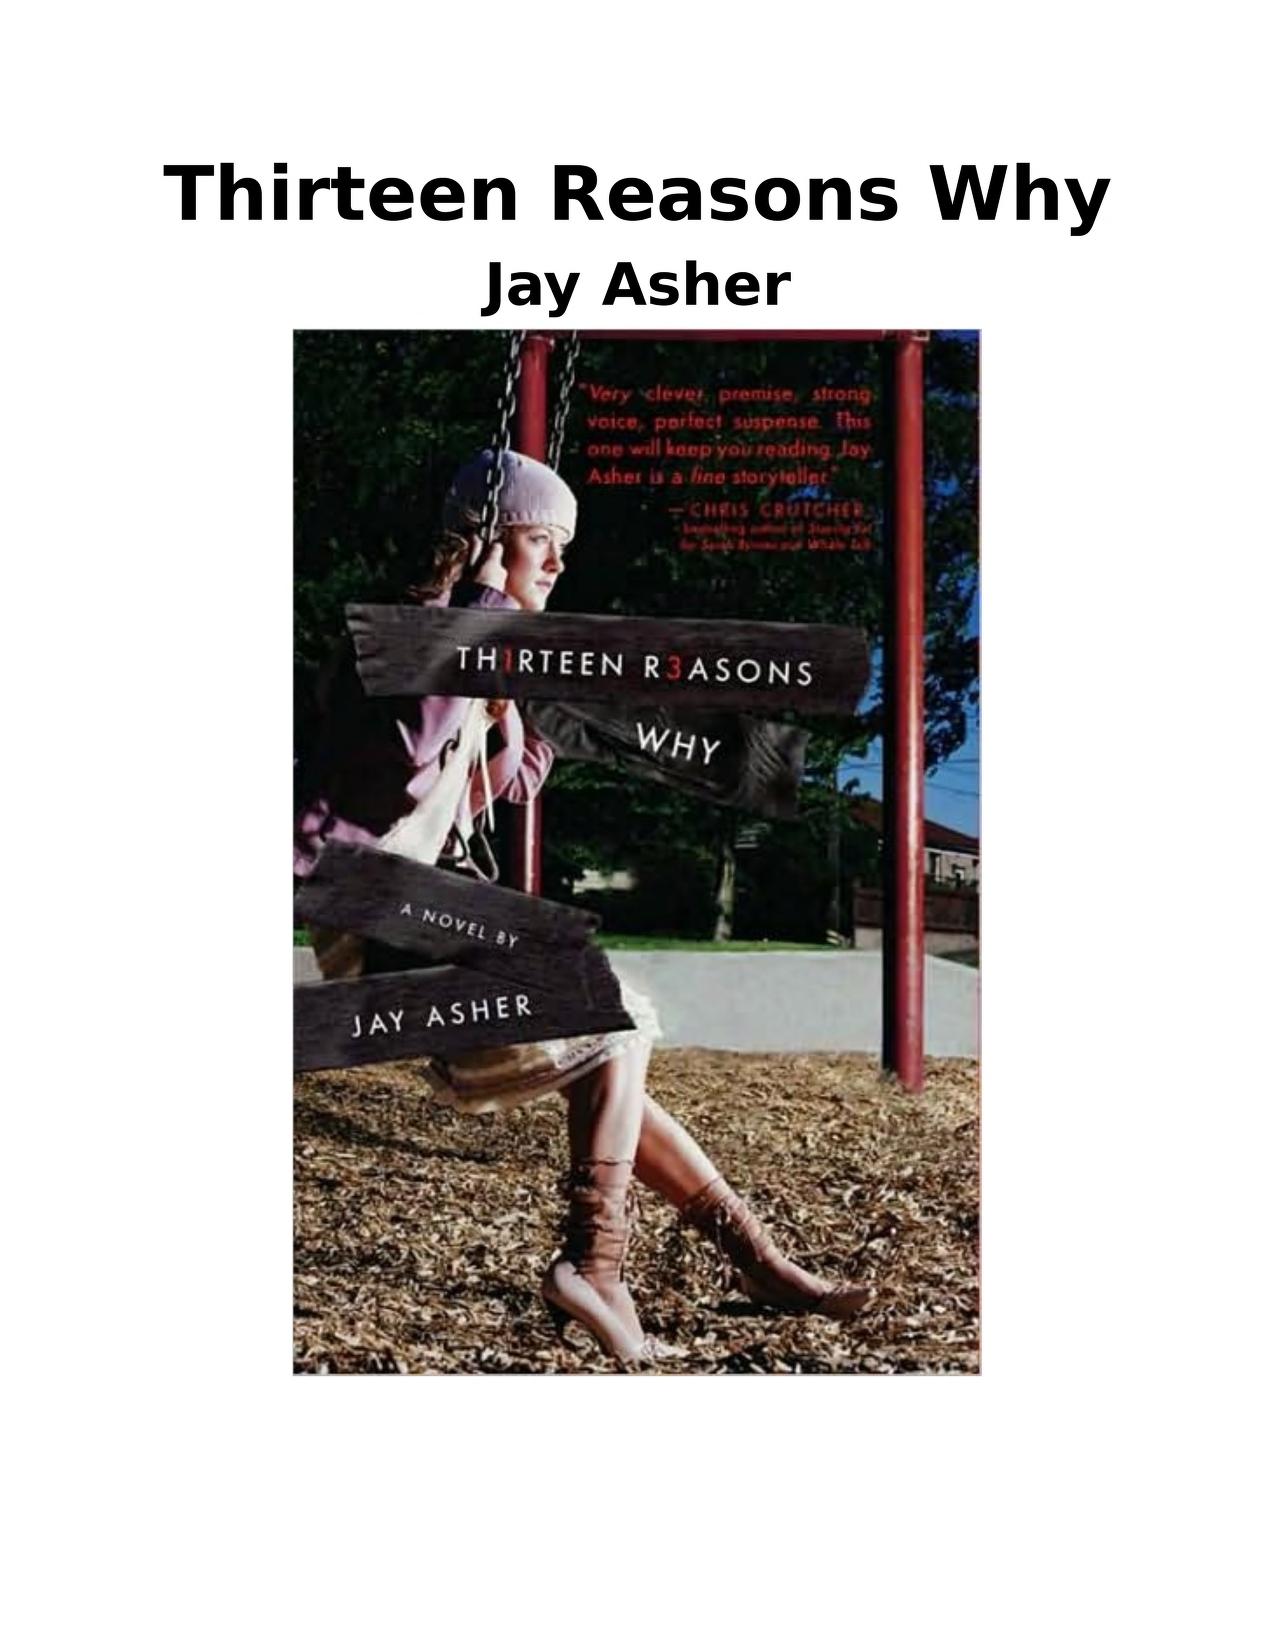 13 reasons why the book pdf download download books